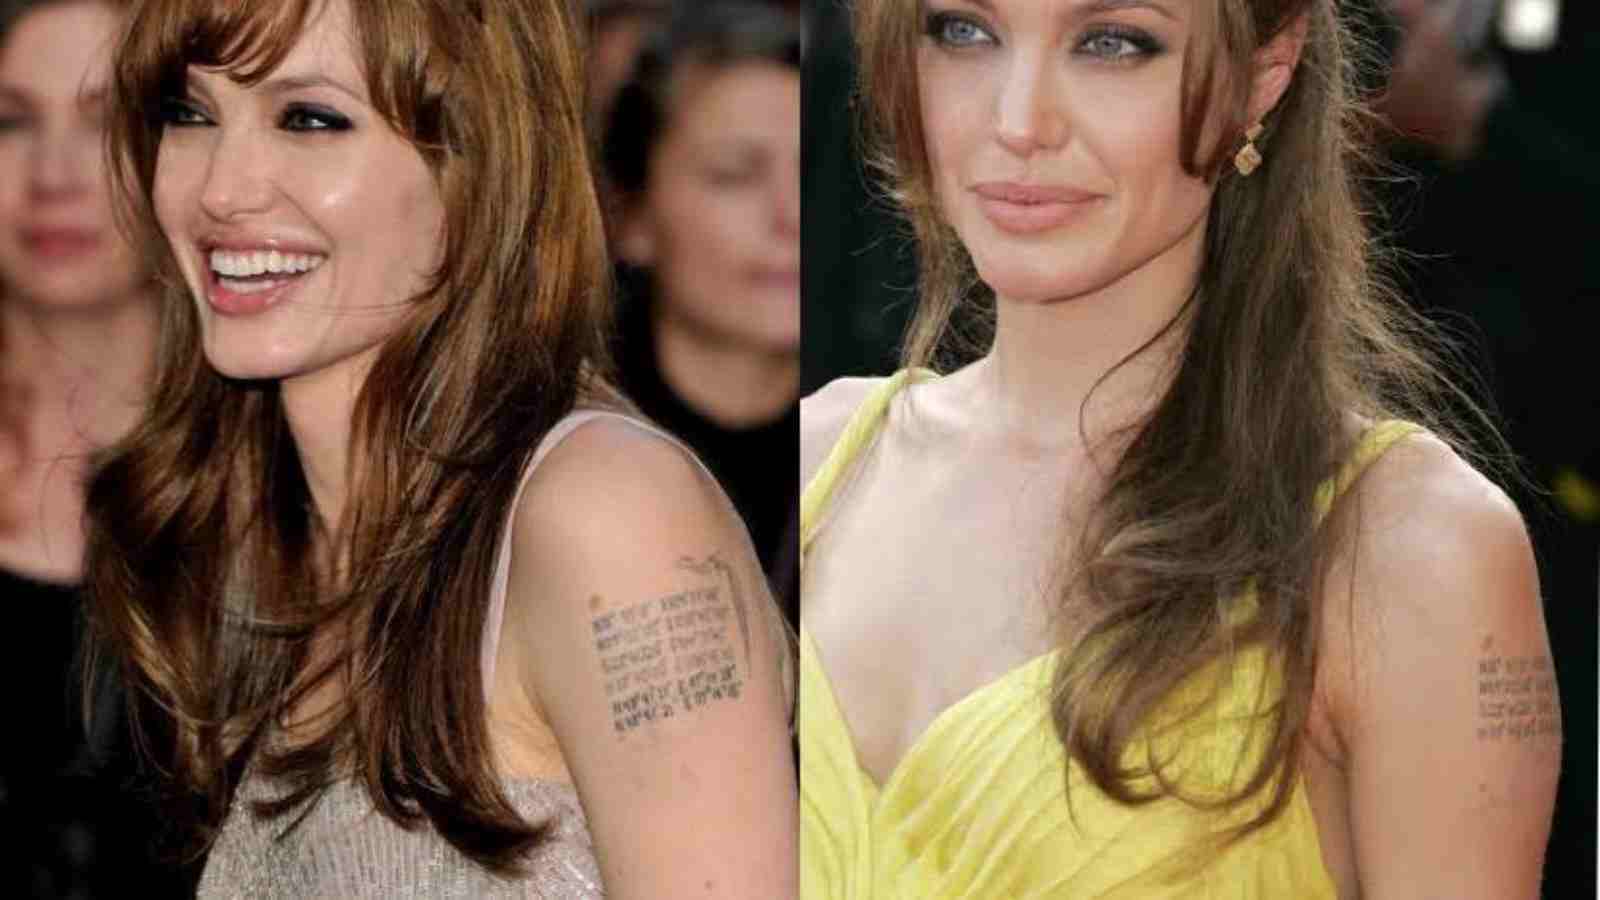 Angelina Jolie's new tattoos in place of her older 'Billy Bob' tattoo